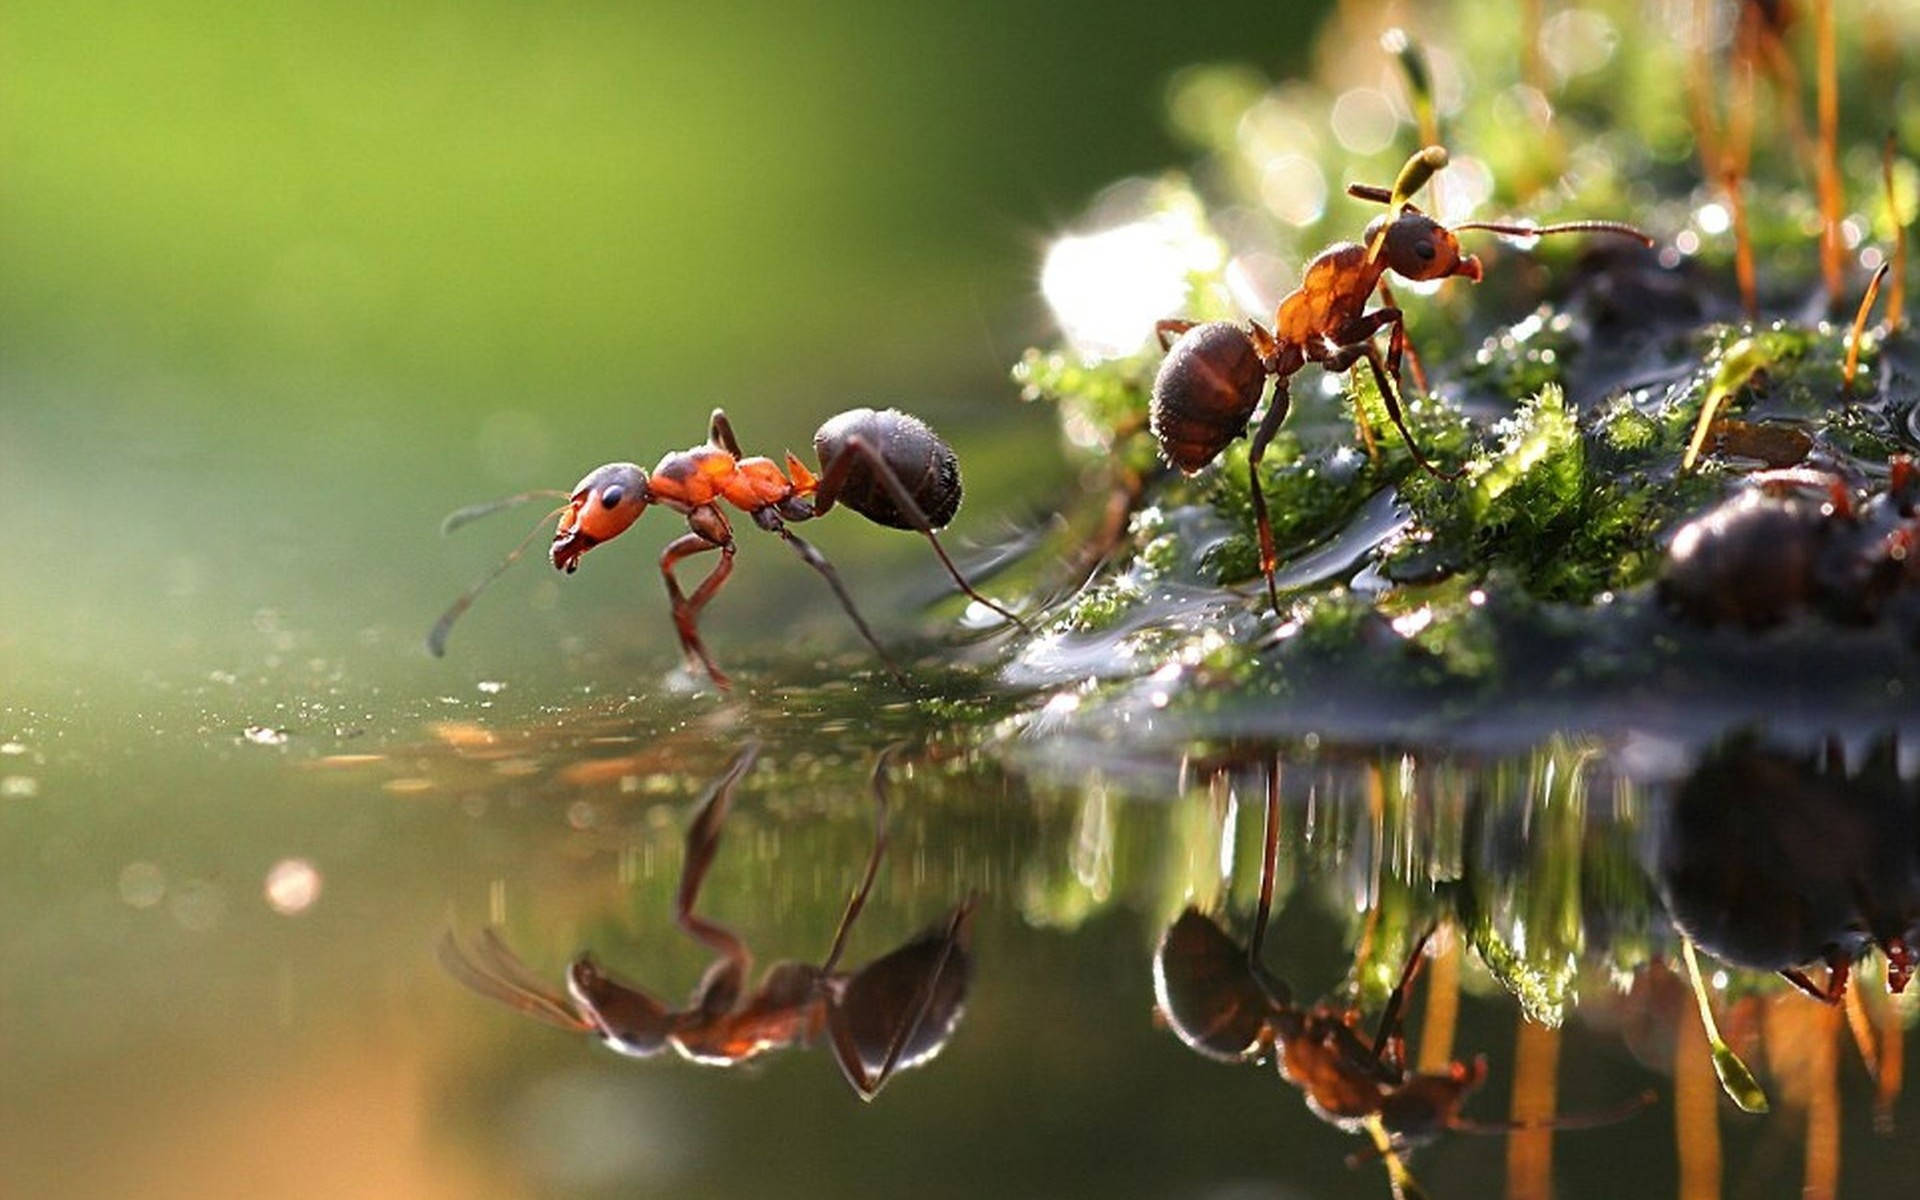 Solo Worker: An Industrious Ant Carrying Food Wallpaper